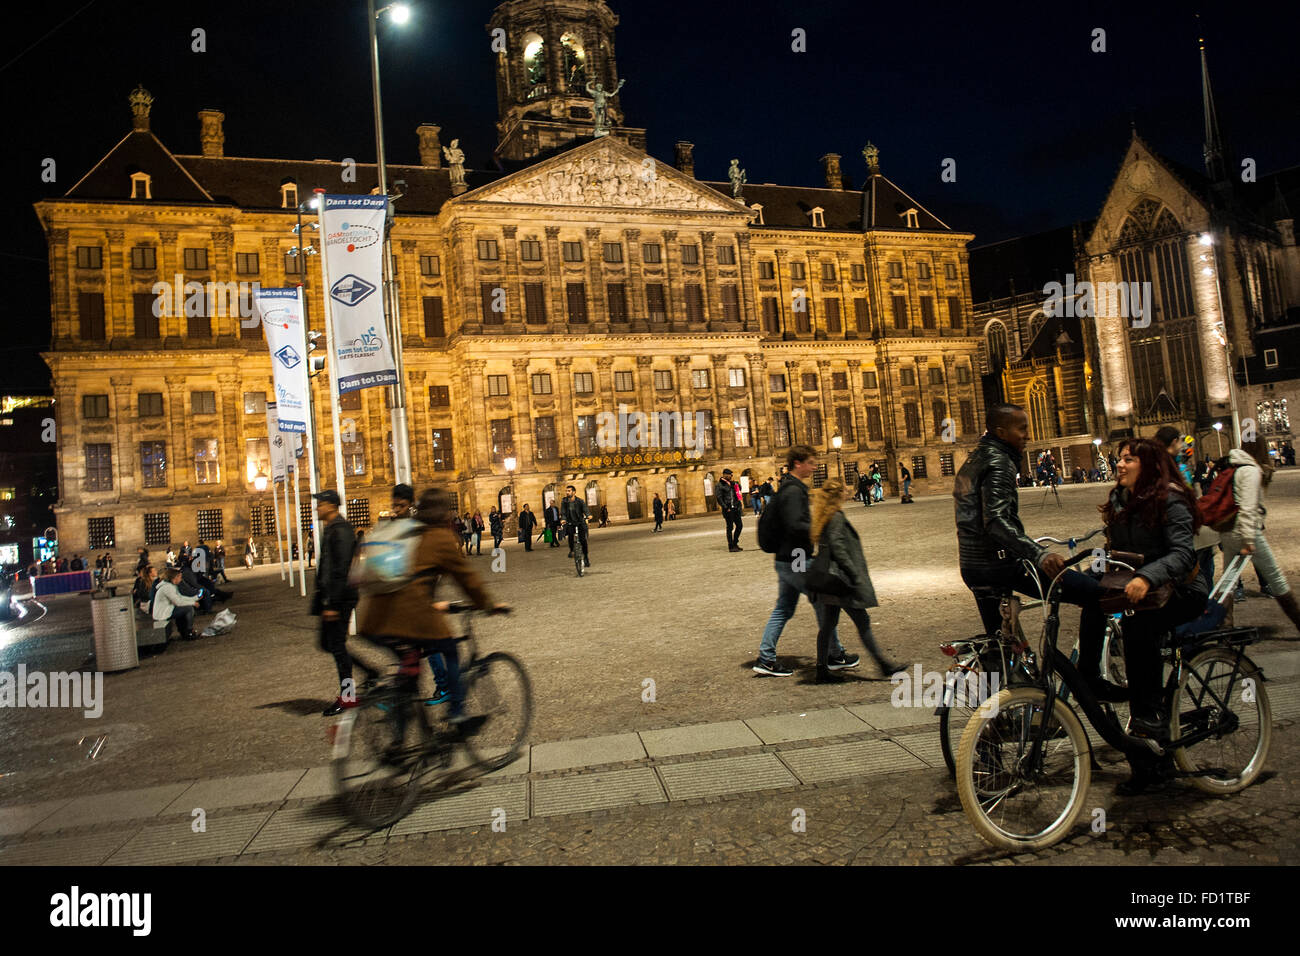 Night view of the Koninklijk Paleis (Royal Palace) located in Amsterdam's famous Dam Square Stock Photo